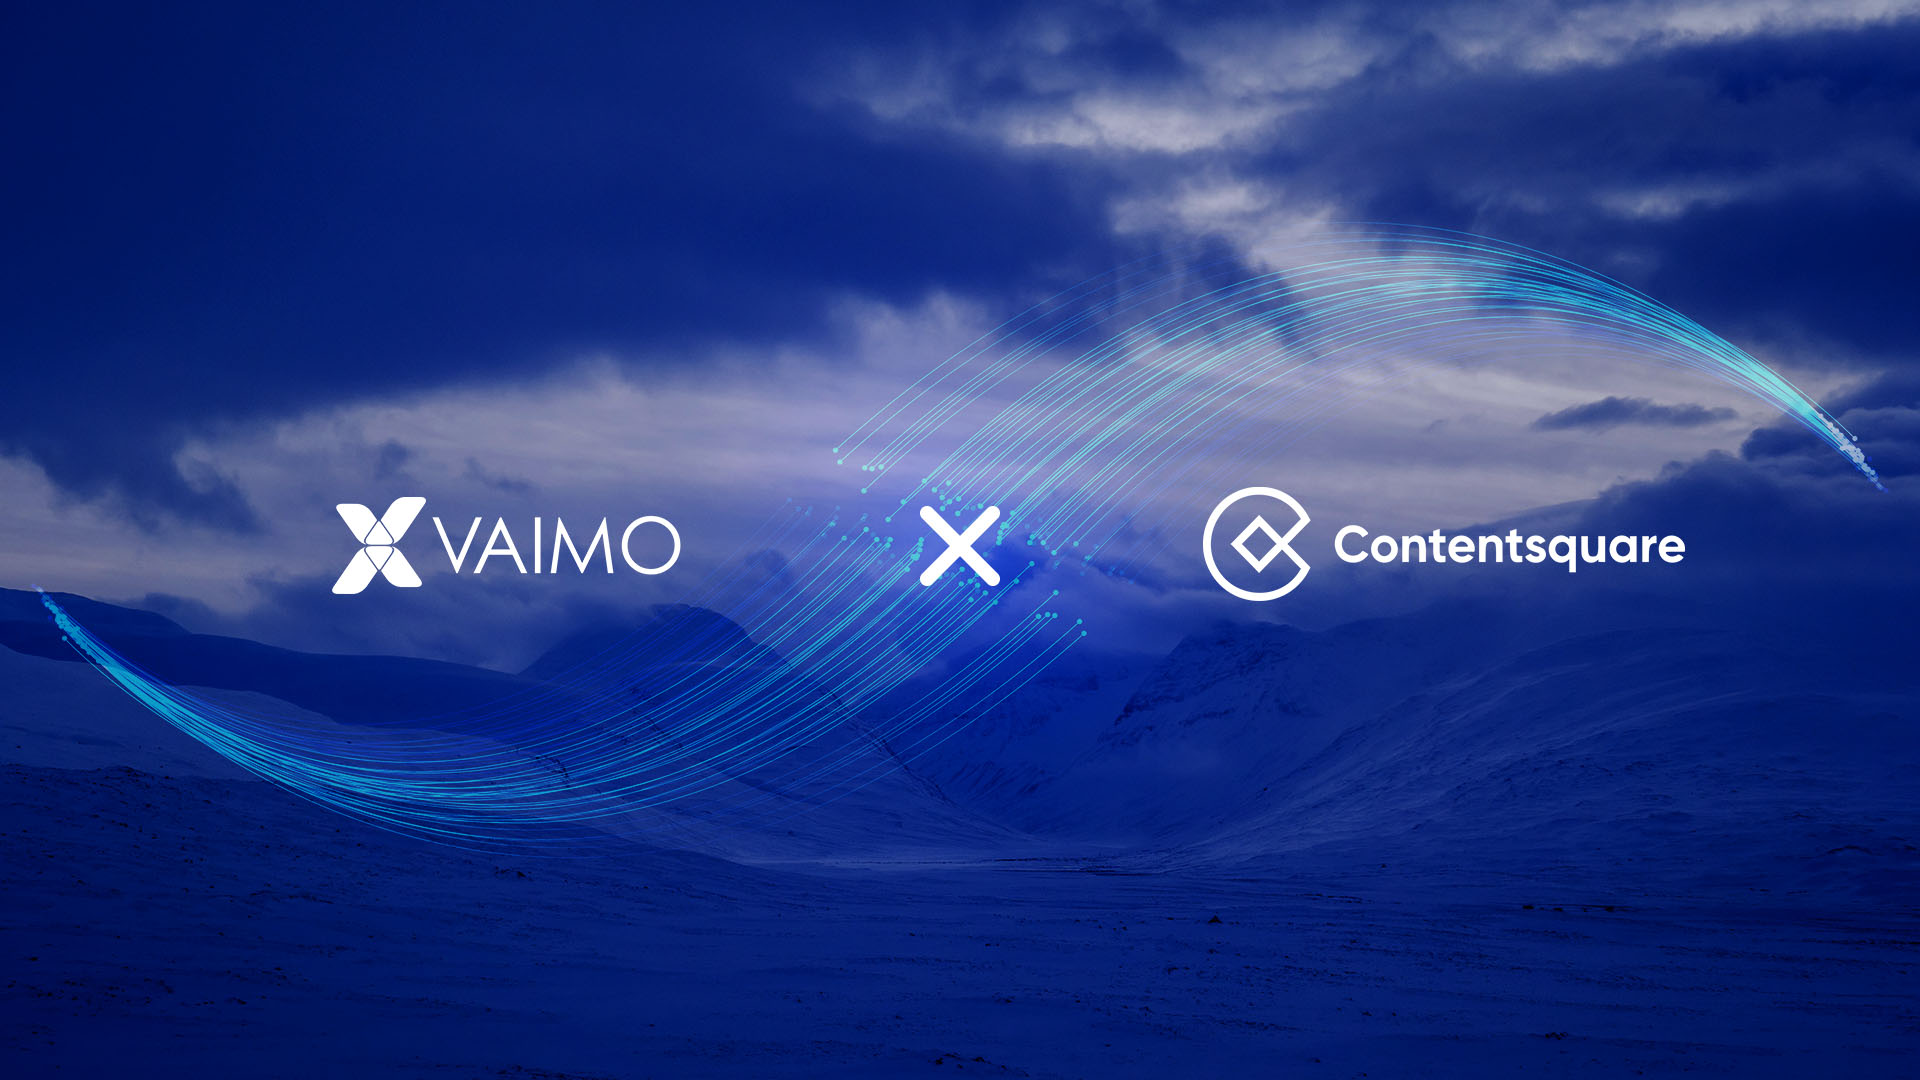 contentsquare and vaimo logo on blue background